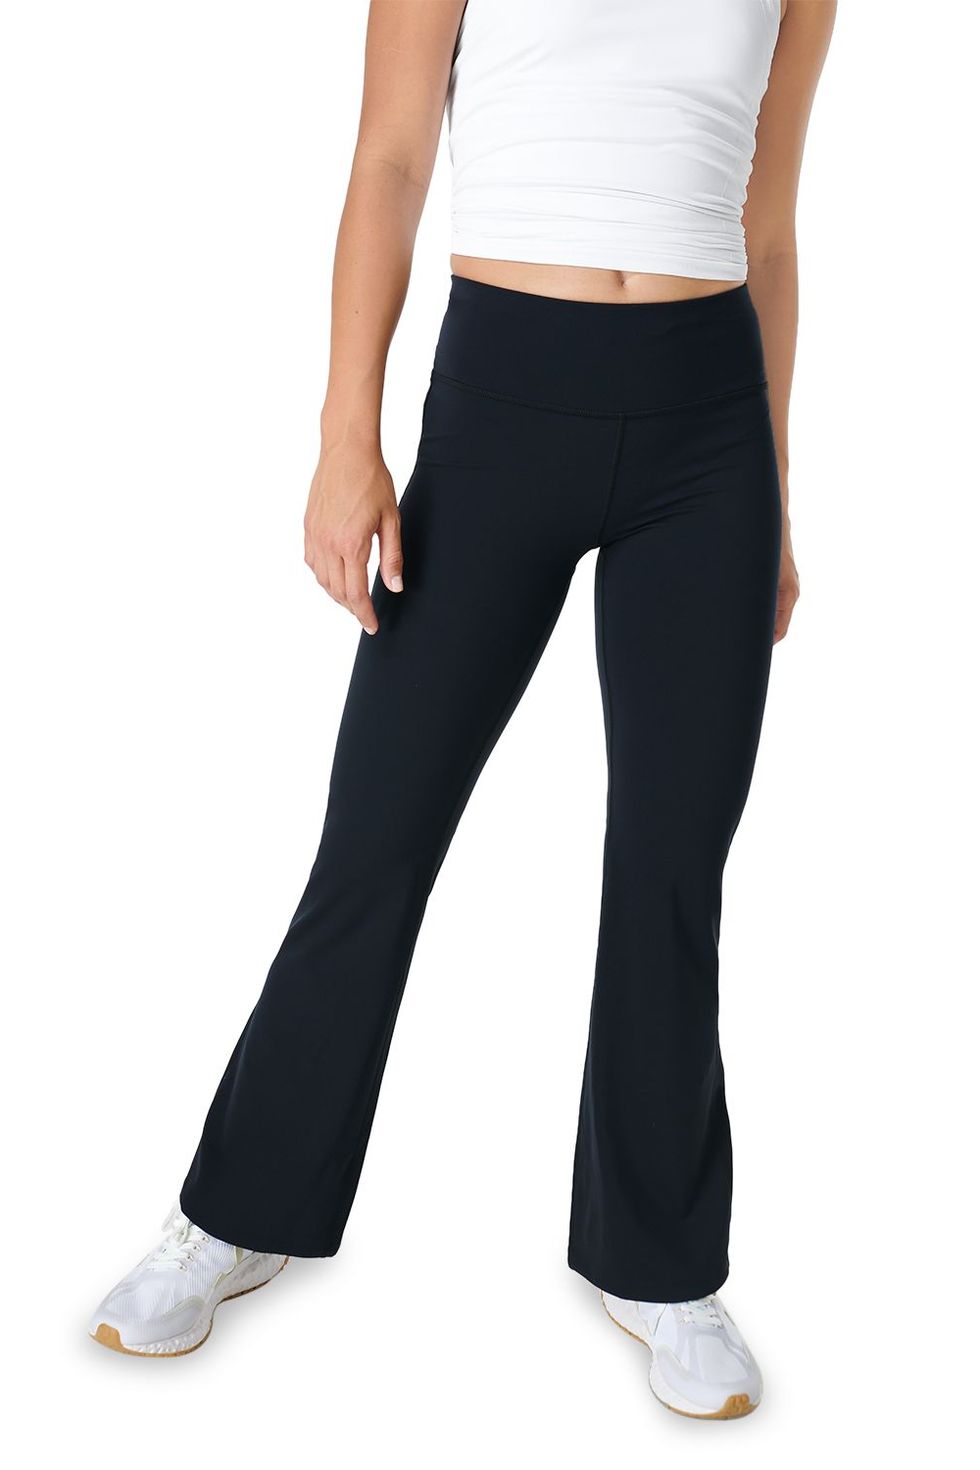 Up To 80% Off on Women's Casual Boot Cut Yoga